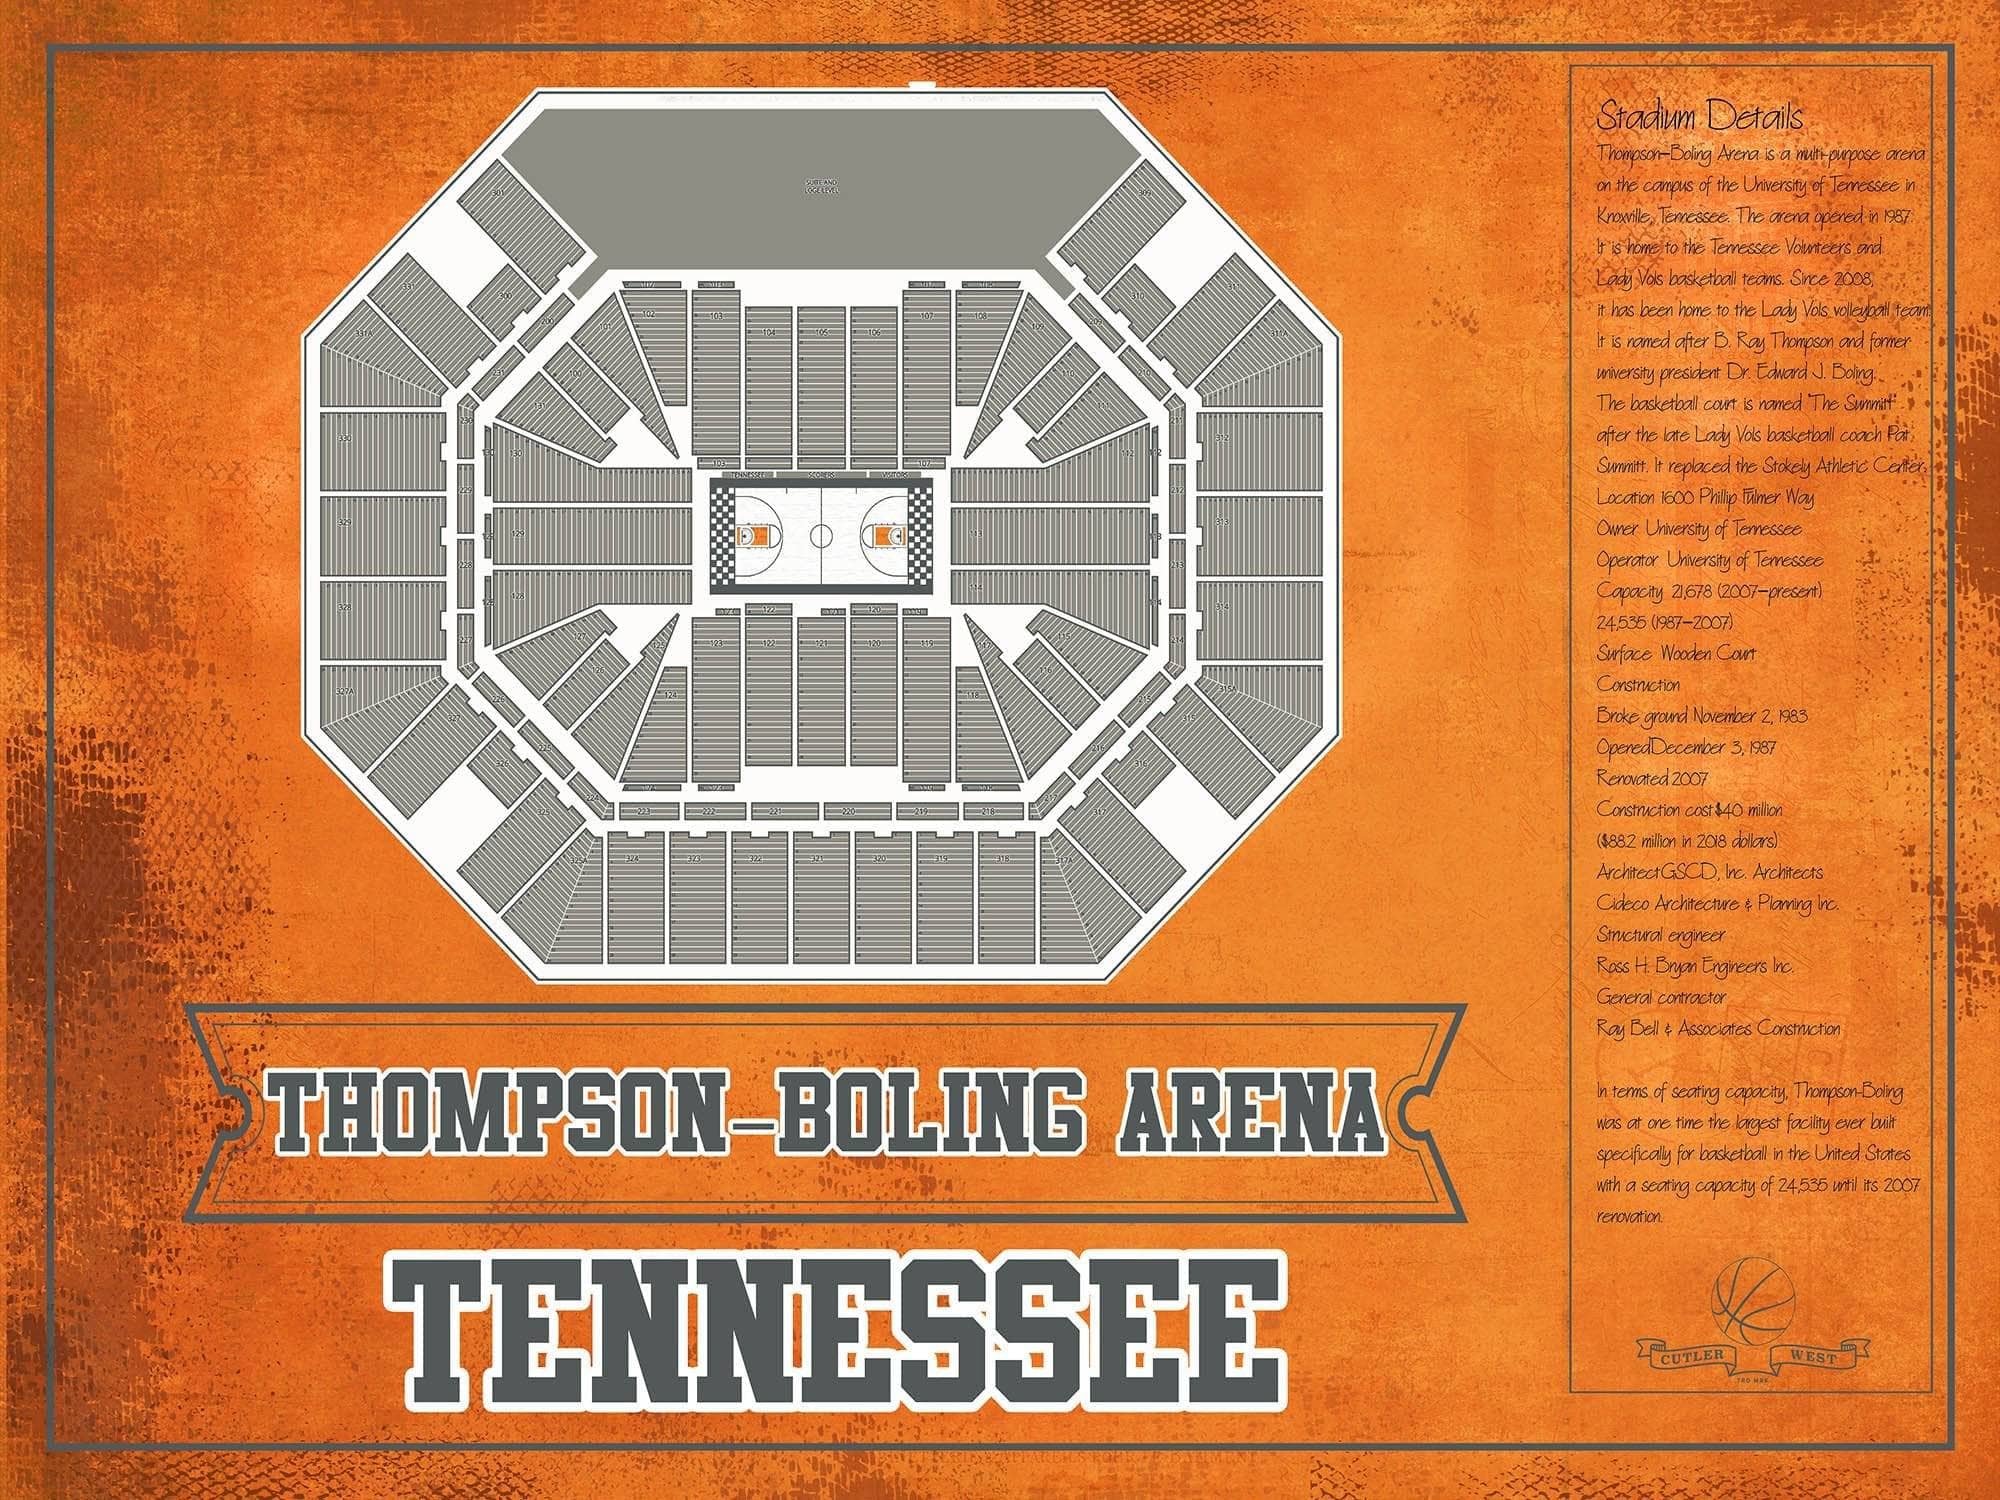 Cutler West Basketball Collection 14" x 11" / Unframed Thompson–Boling Arena - Tennessee Volunteers, Lady Vols NCAA College Basketball Blueprint Art 93335021484746